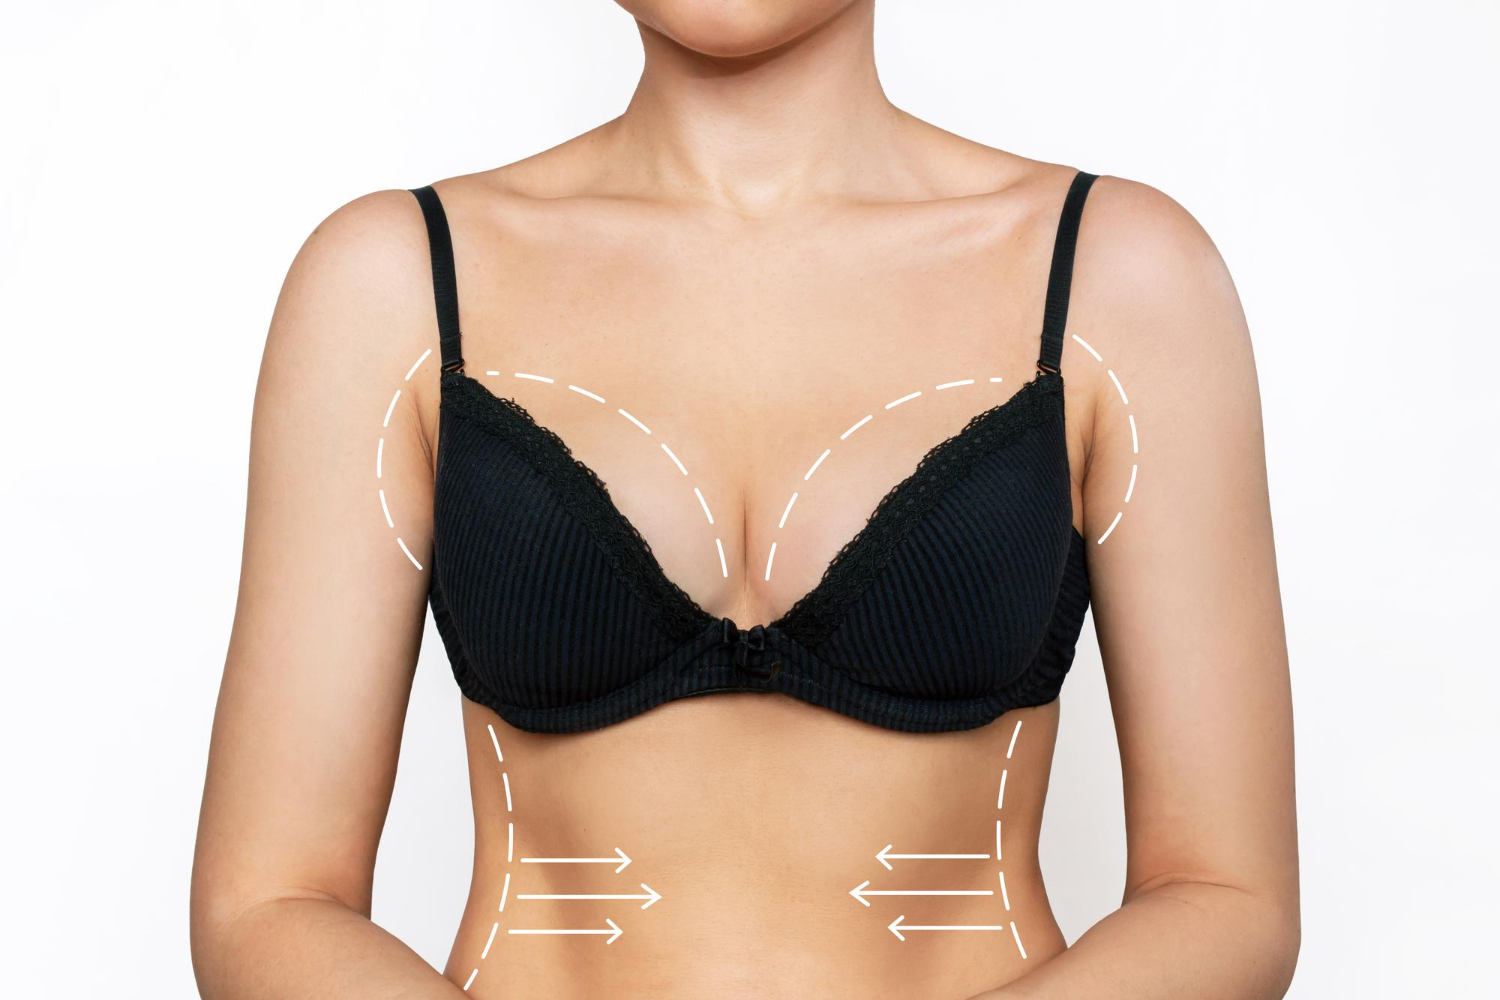 Breast Lift With Liposuction